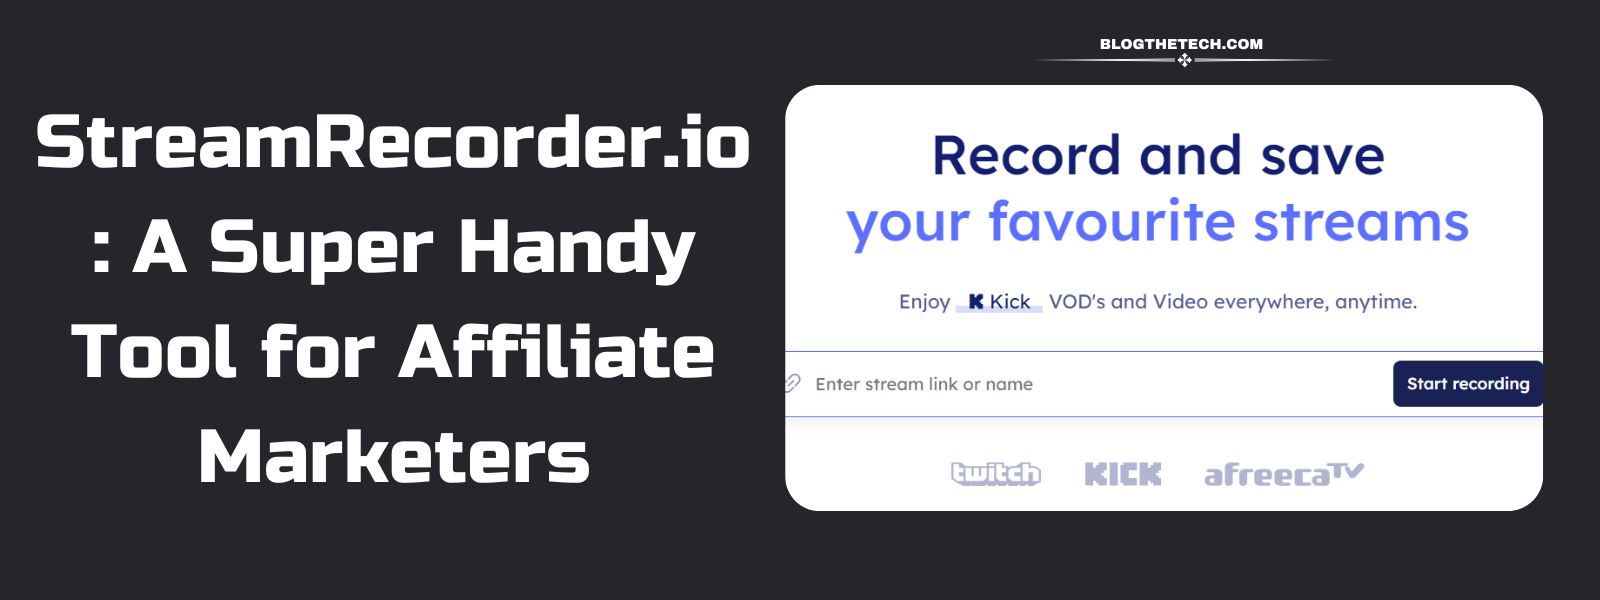 StreamRecorder.io: A Super Handy Tool for Affiliate Marketers